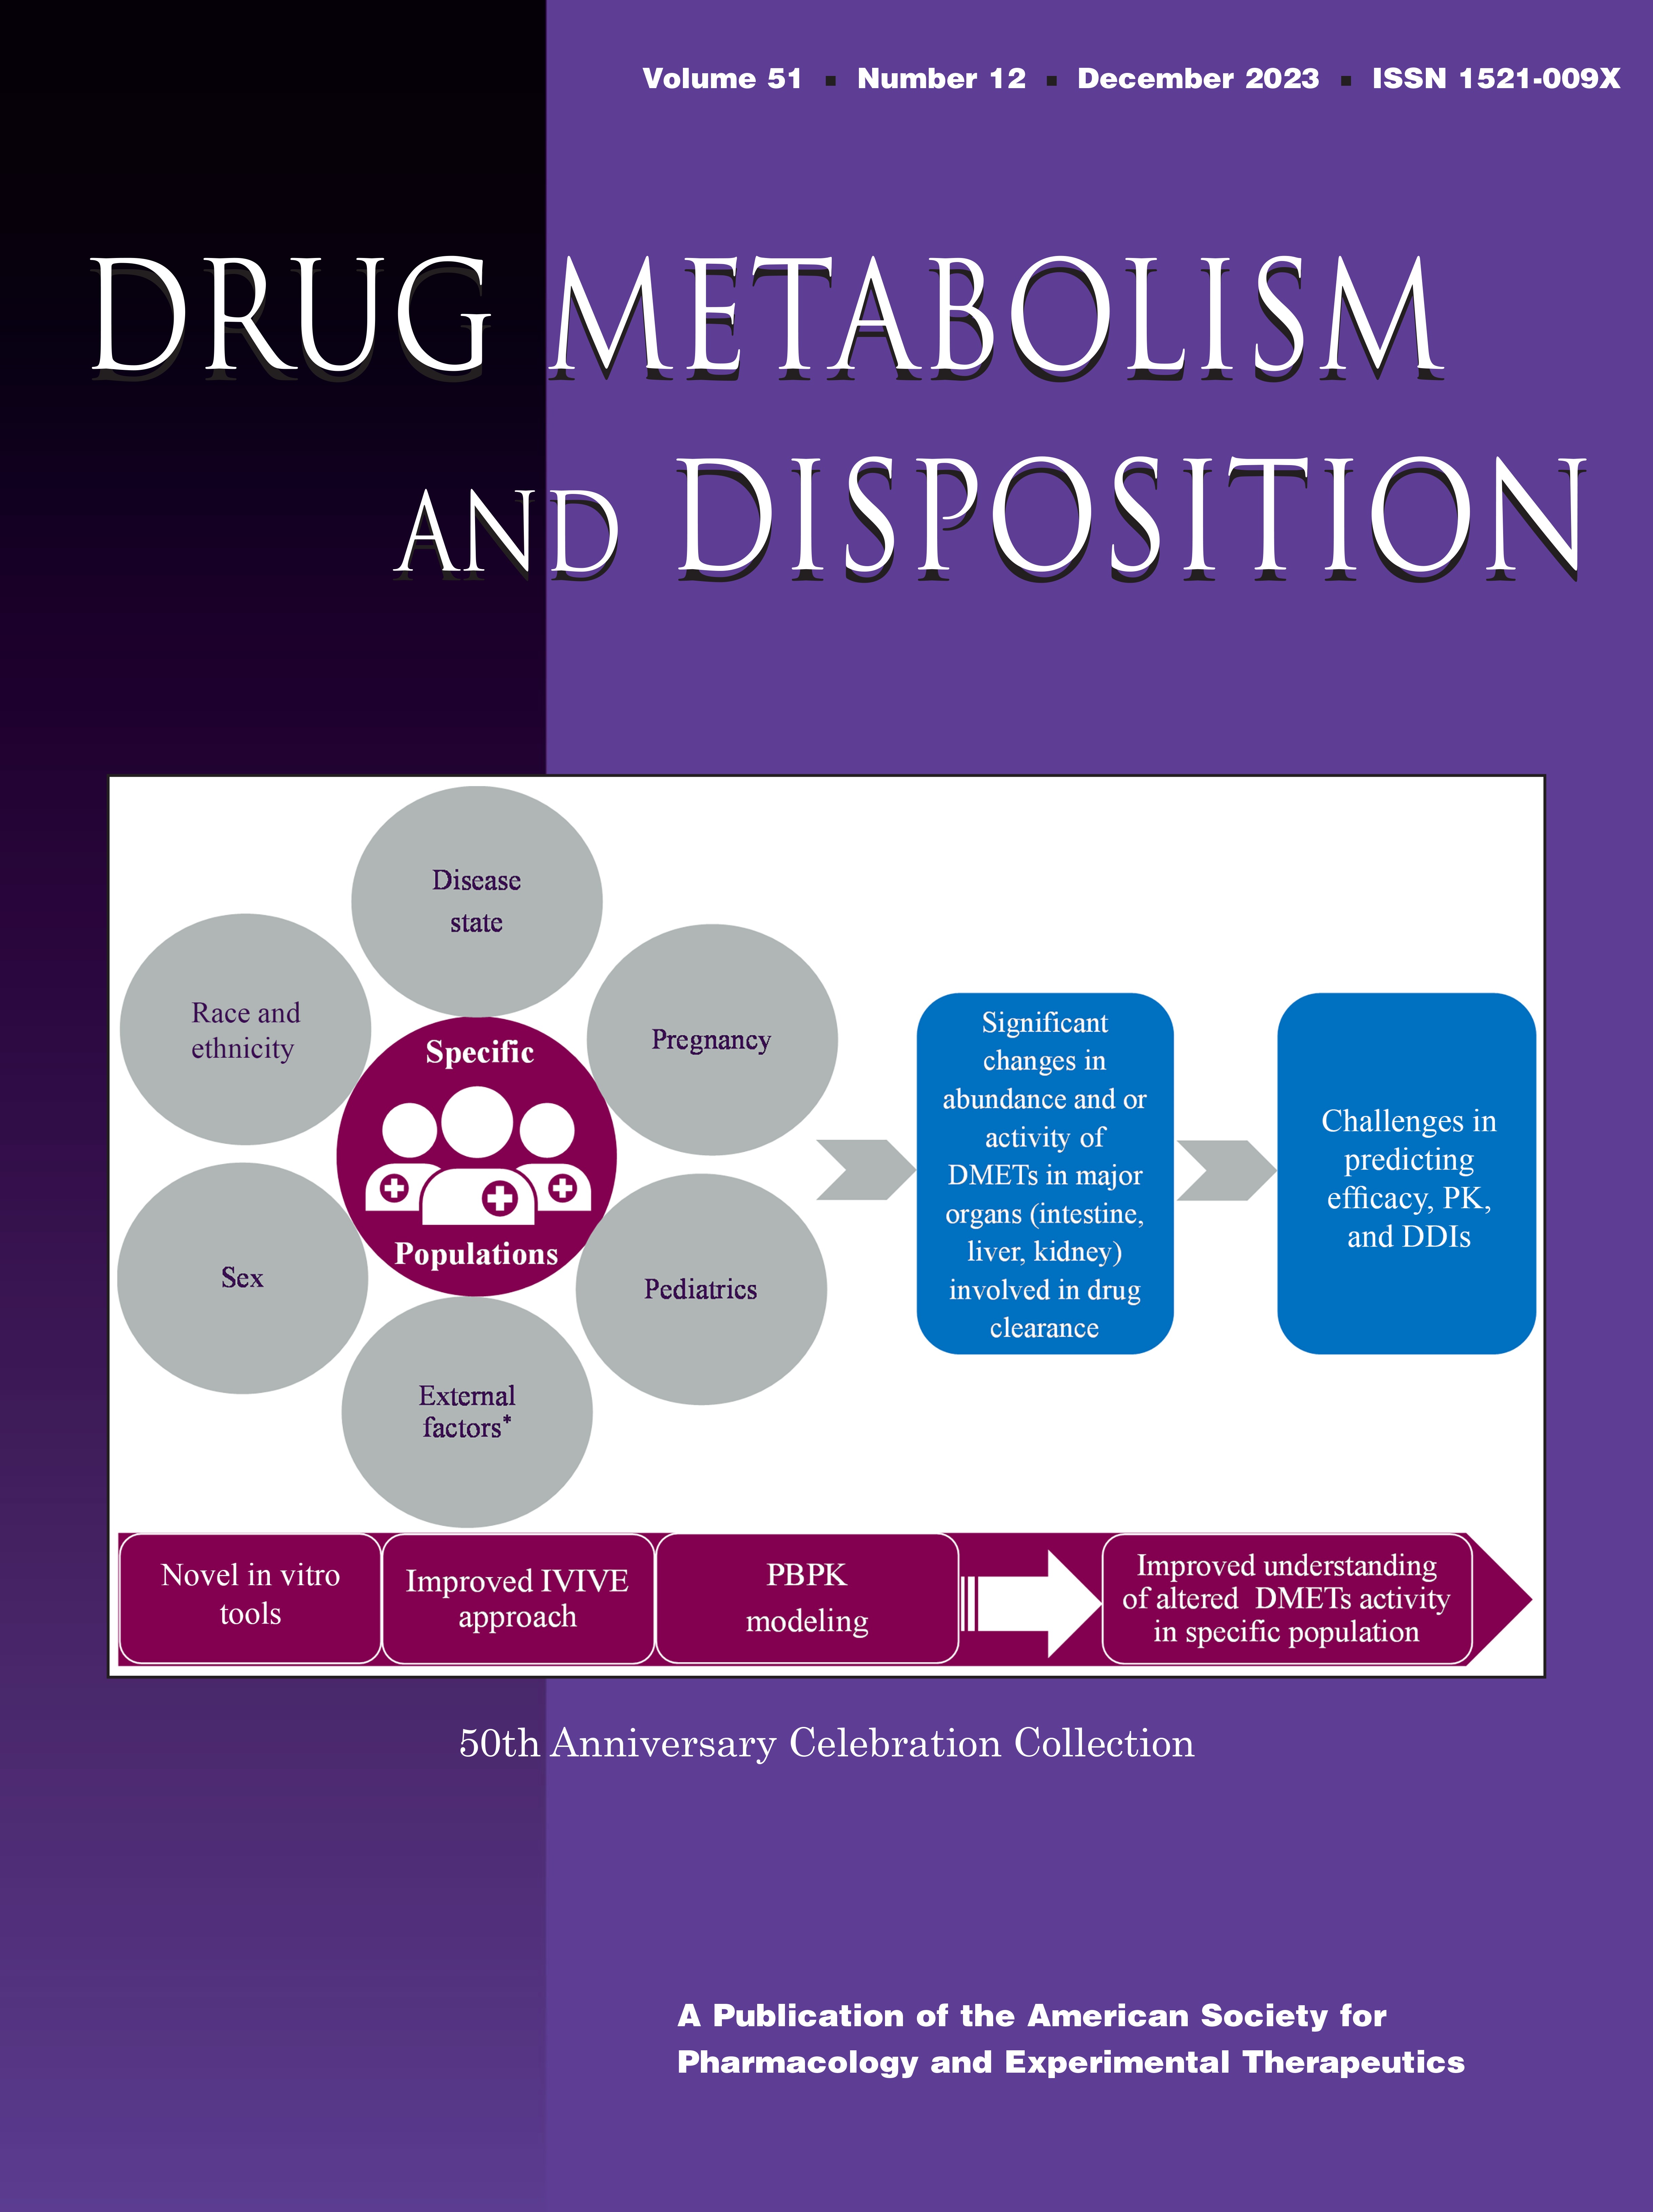 The African Liver Tissue Biorepository Consortium: Capacitating Population-Appropriate Drug Metabolism, Pharmacokinetics, and Pharmacogenetics Research in Drug Discovery and Development [50th Anniversary Celebration Collection]